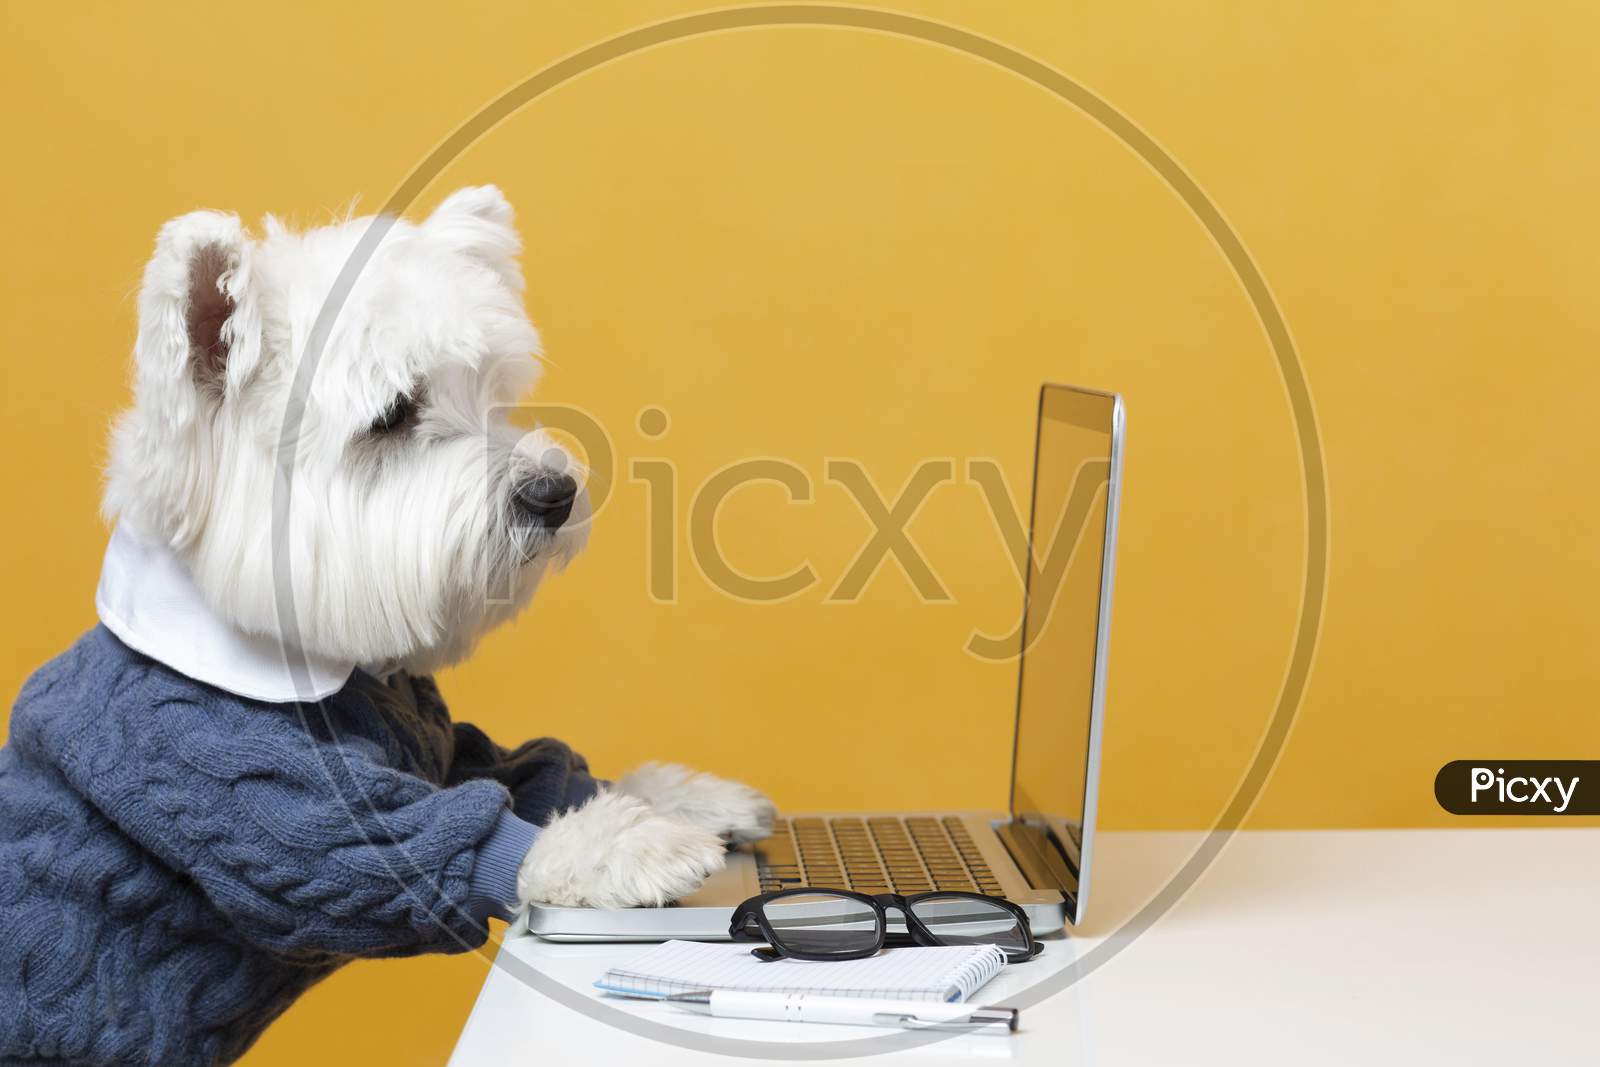 Cute little dog impersonating a business person, dog with a laptop